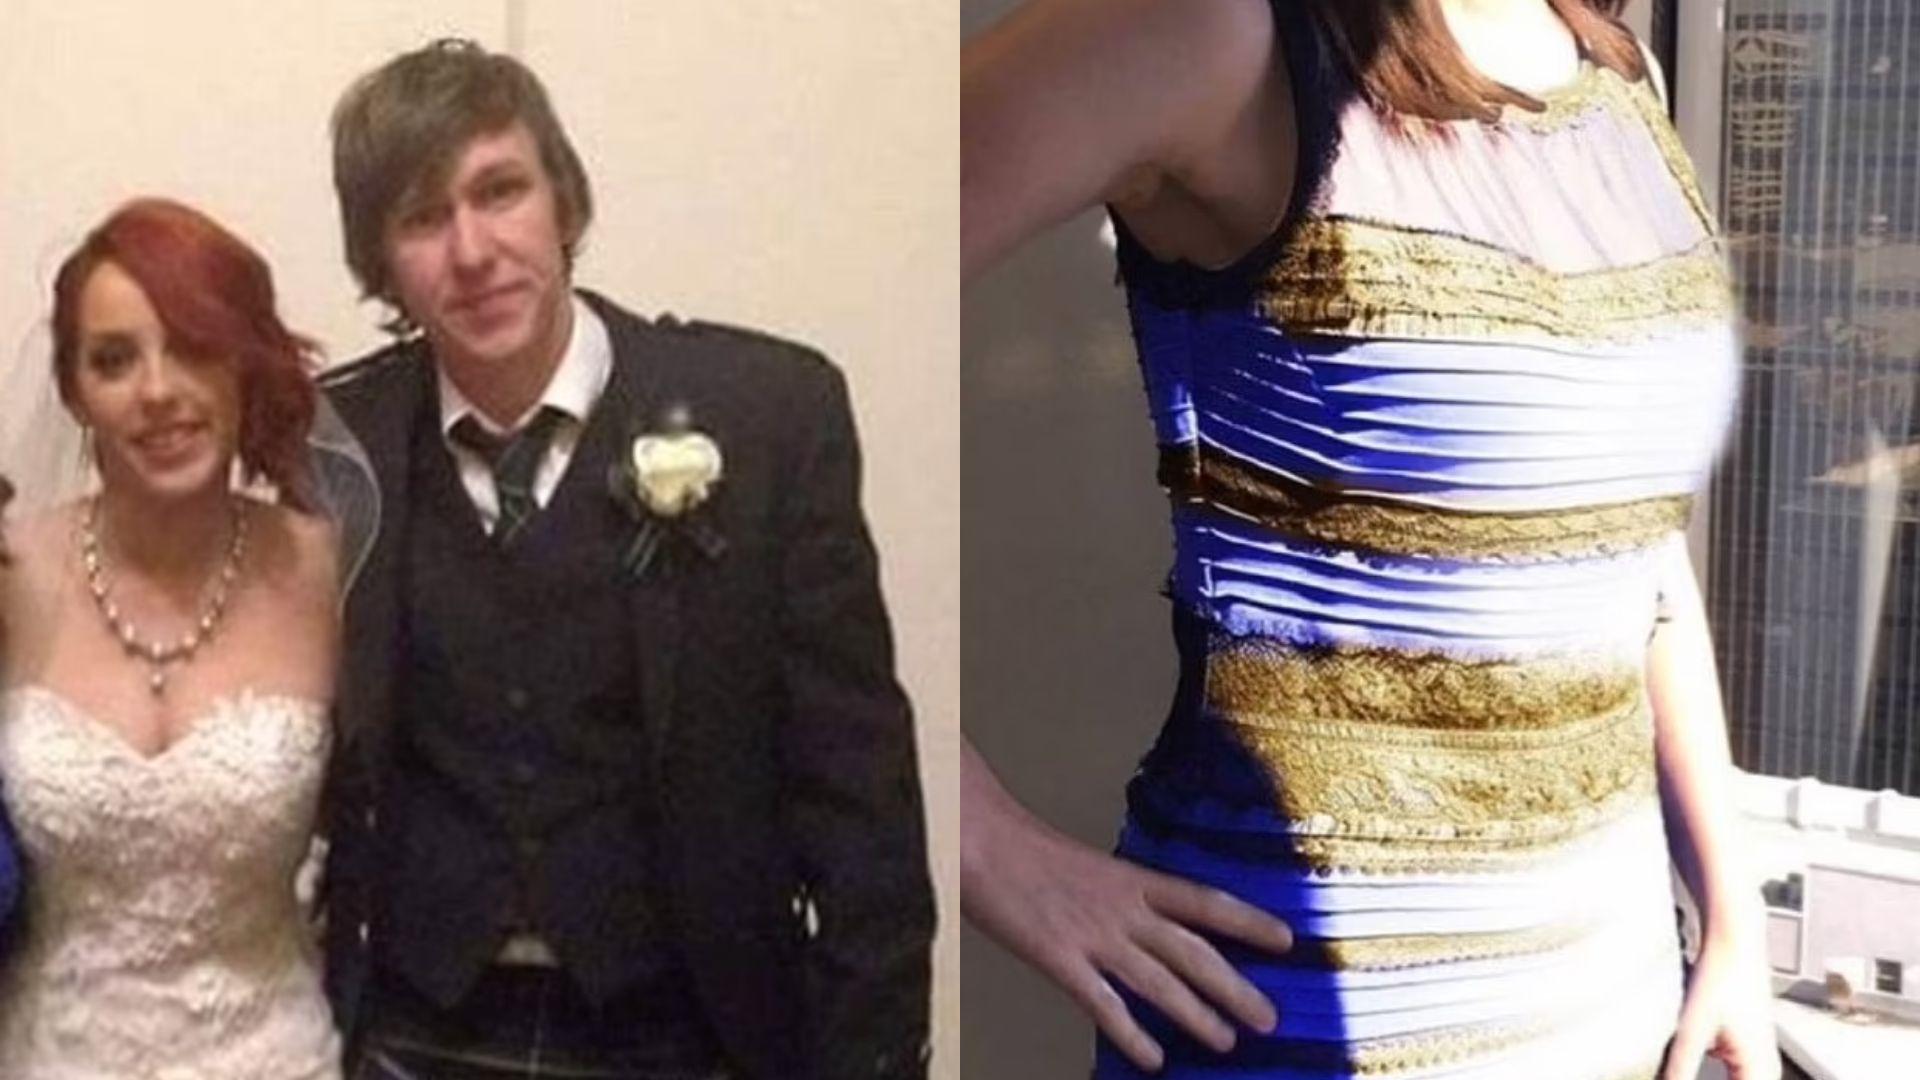 The dress that broke the internet and the couple that made it go viral on their wedding.